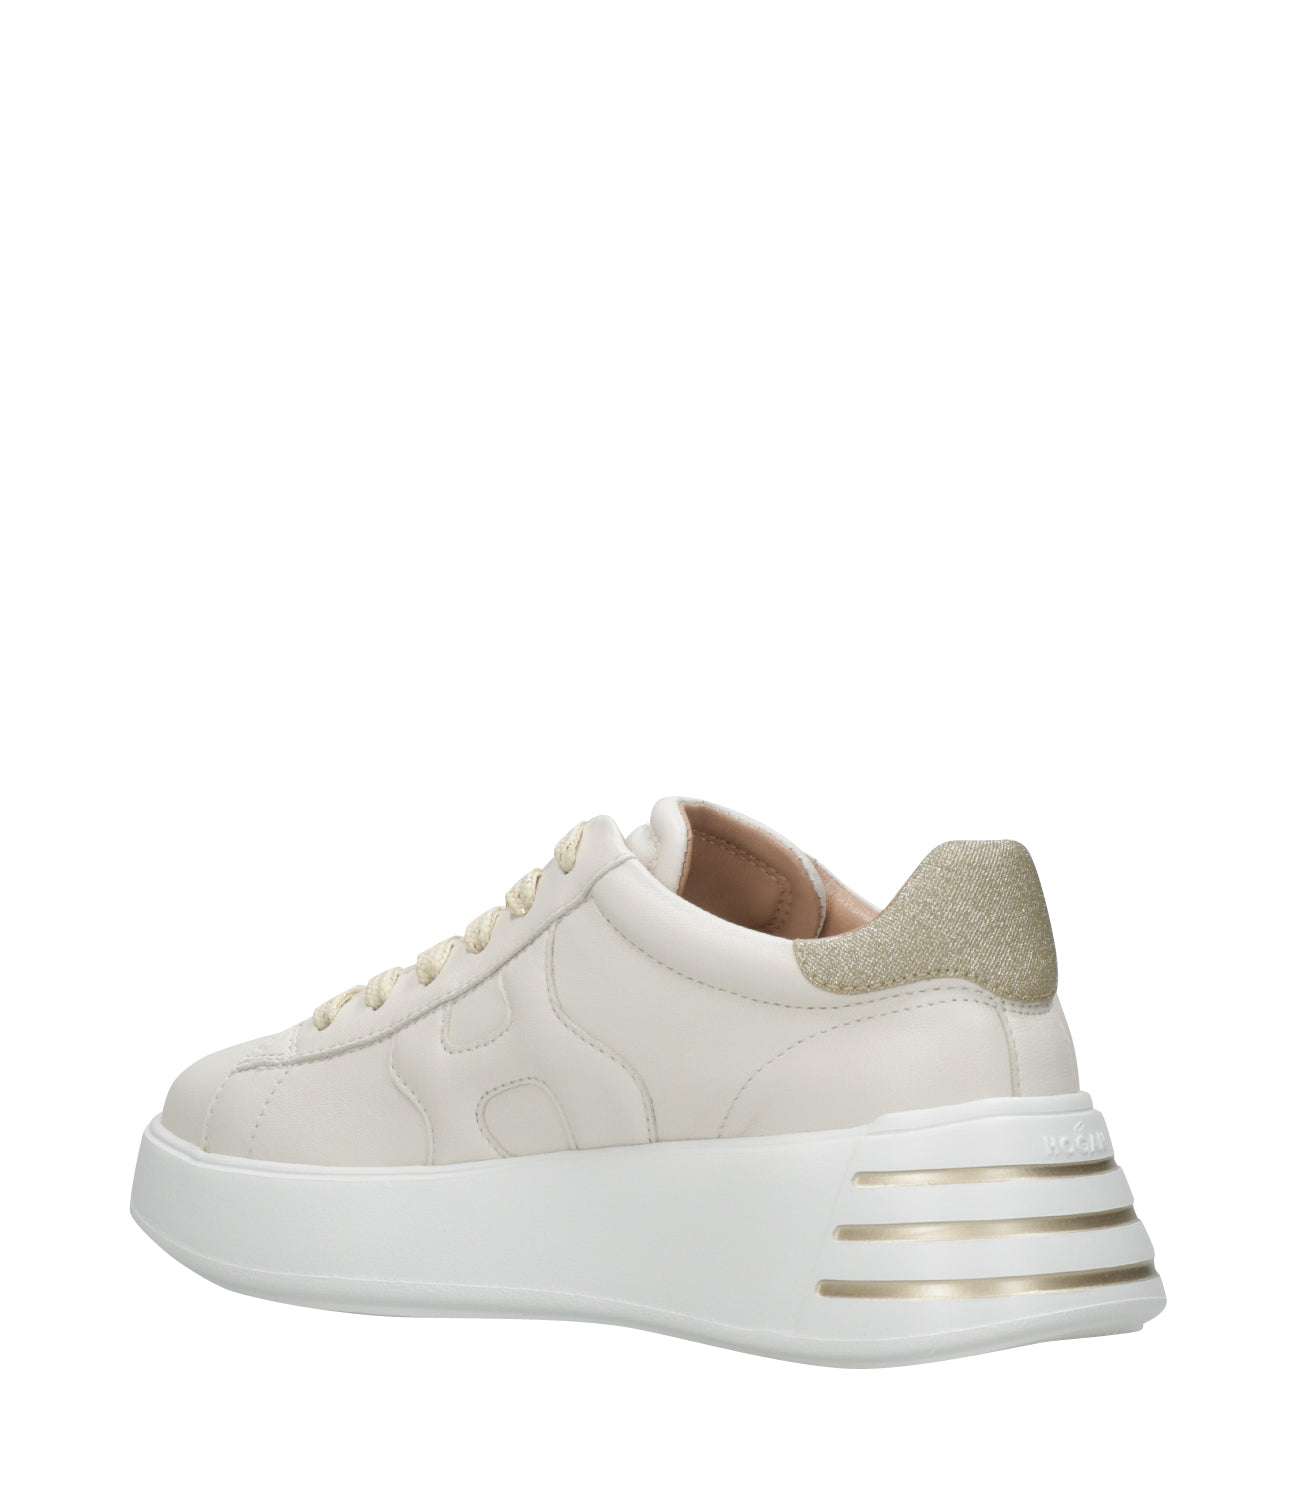 Hogan | Rebel Sneakers Ivory and Gold